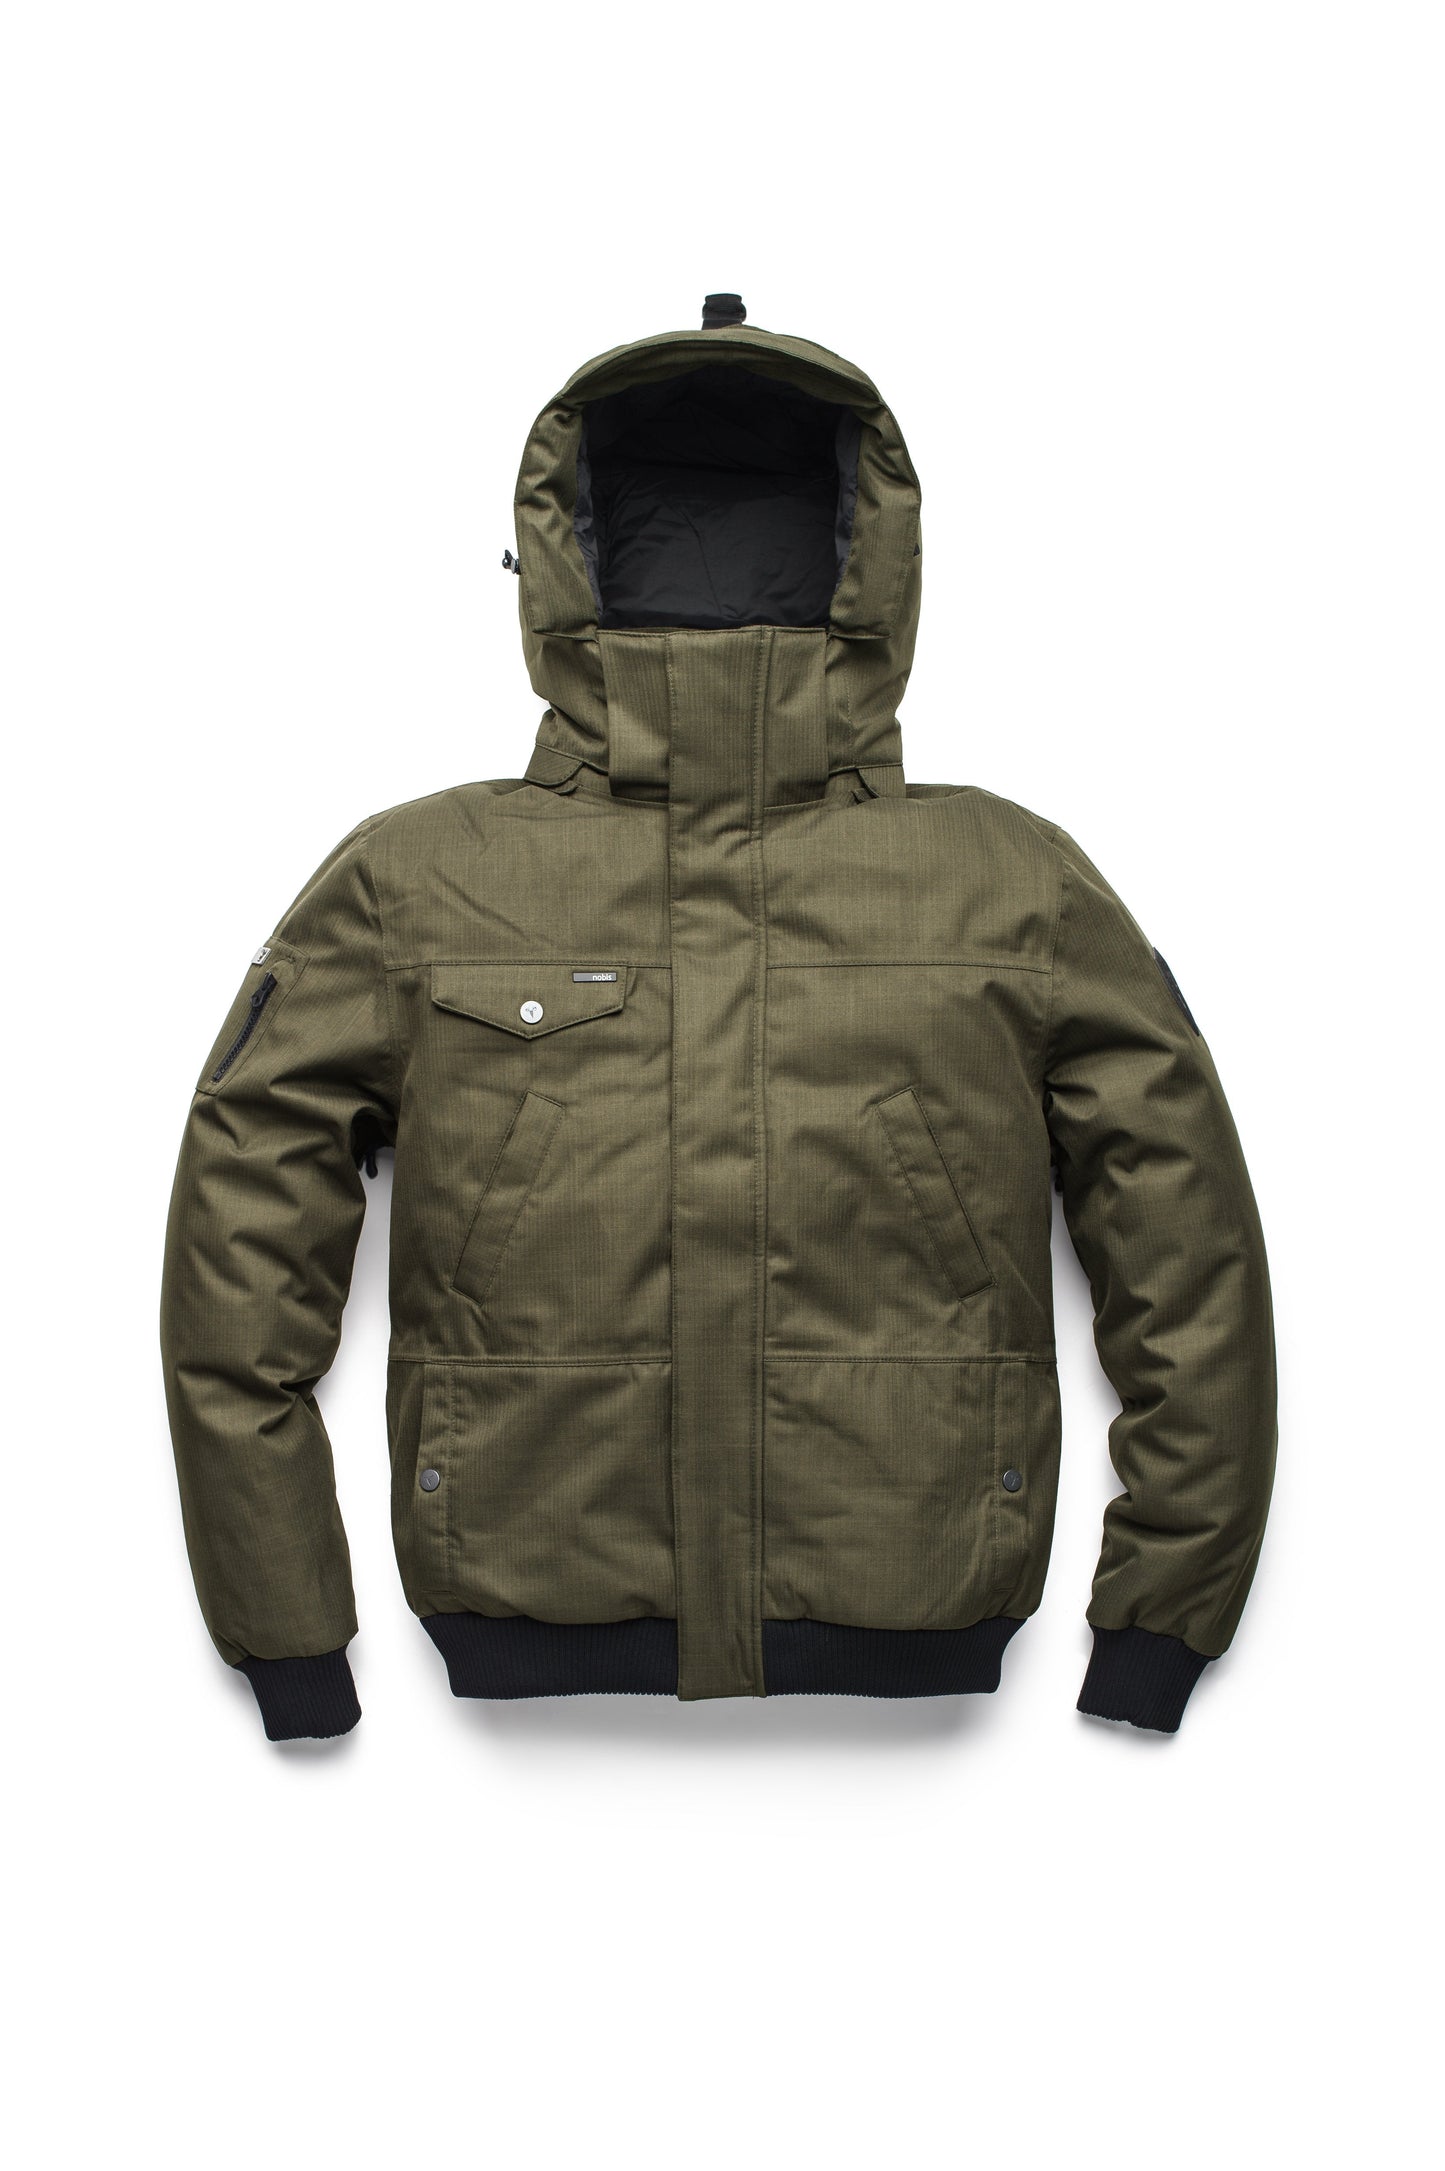 Men's sleek down filled bomber jacket with clean details and a fur free hood in CH Fatigue